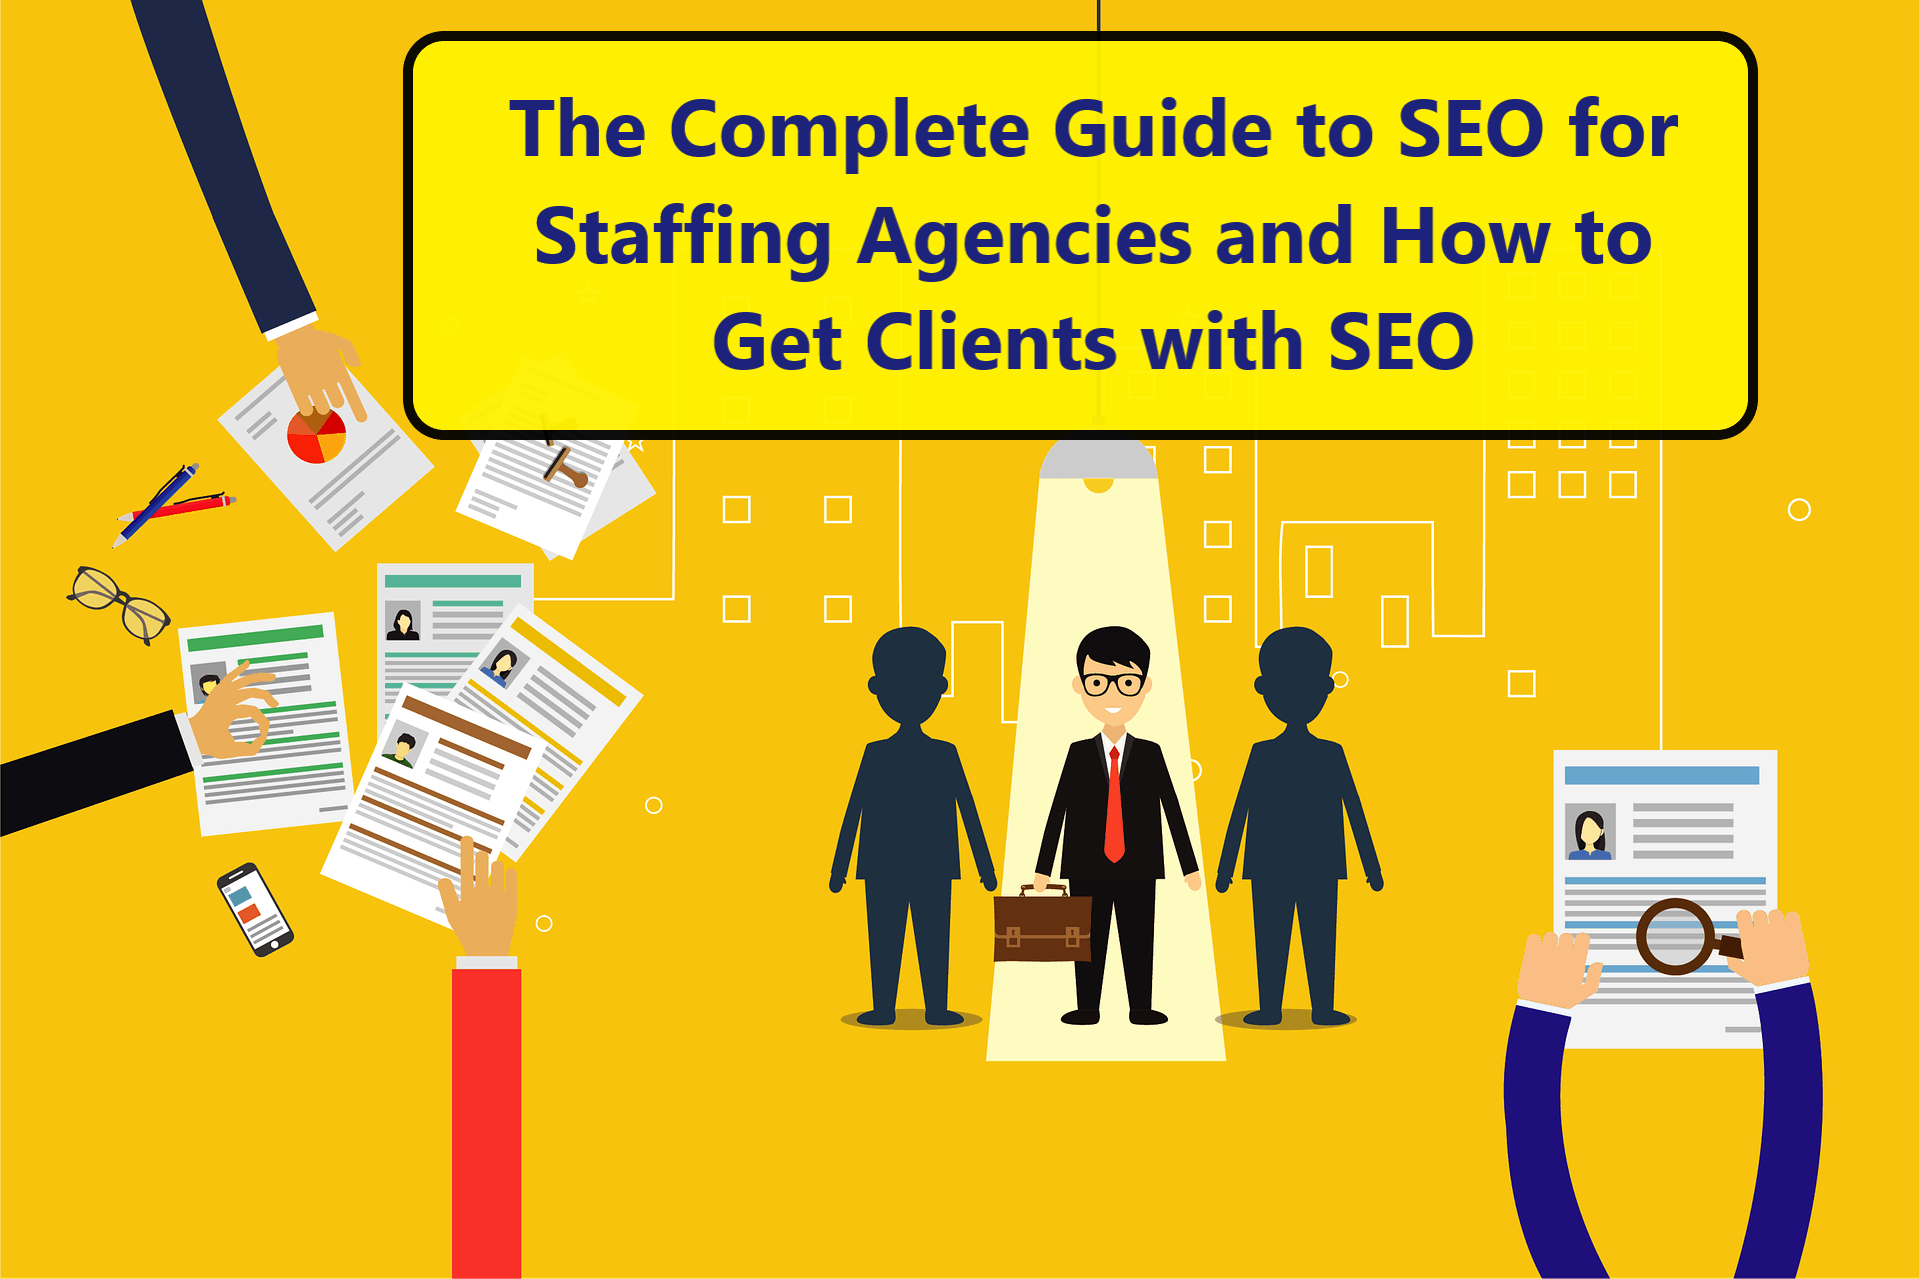 The Complete Guide to SEO for Staffing Agencies and How to Get Clients with SEO